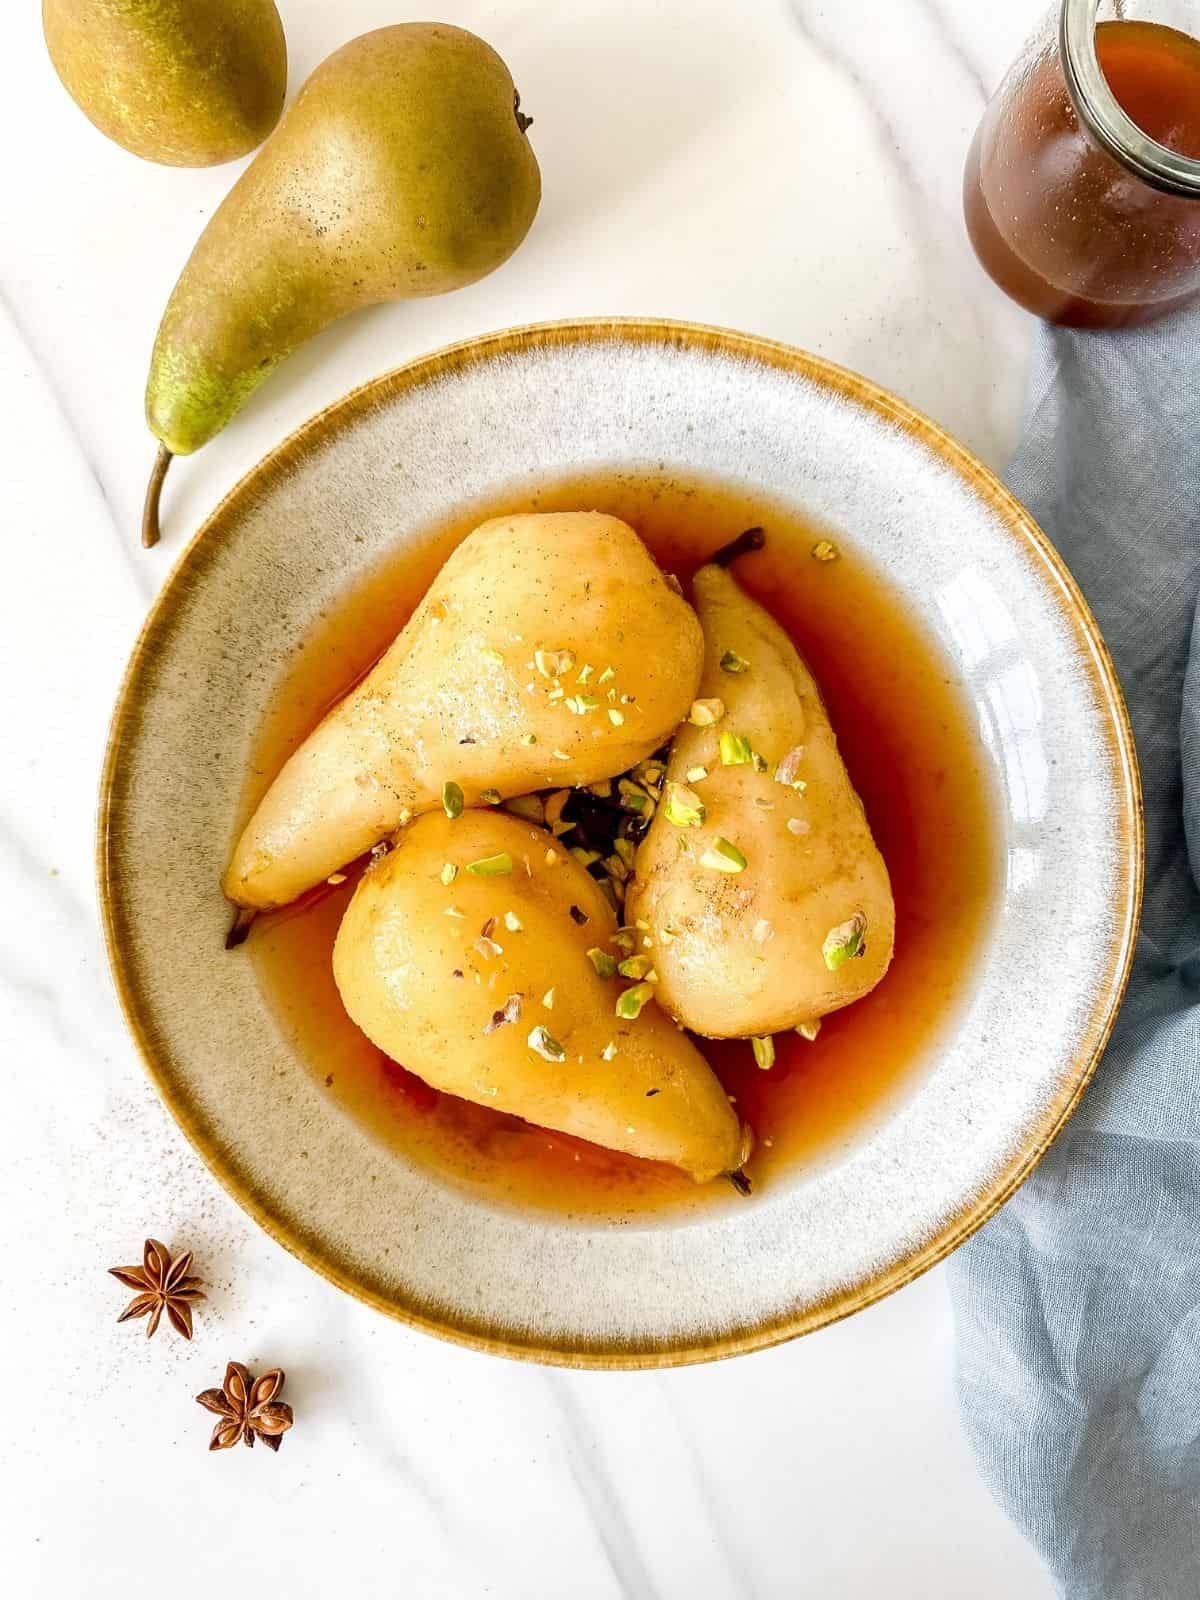 spiced poached pears in a grey bowl on a blue cloth.